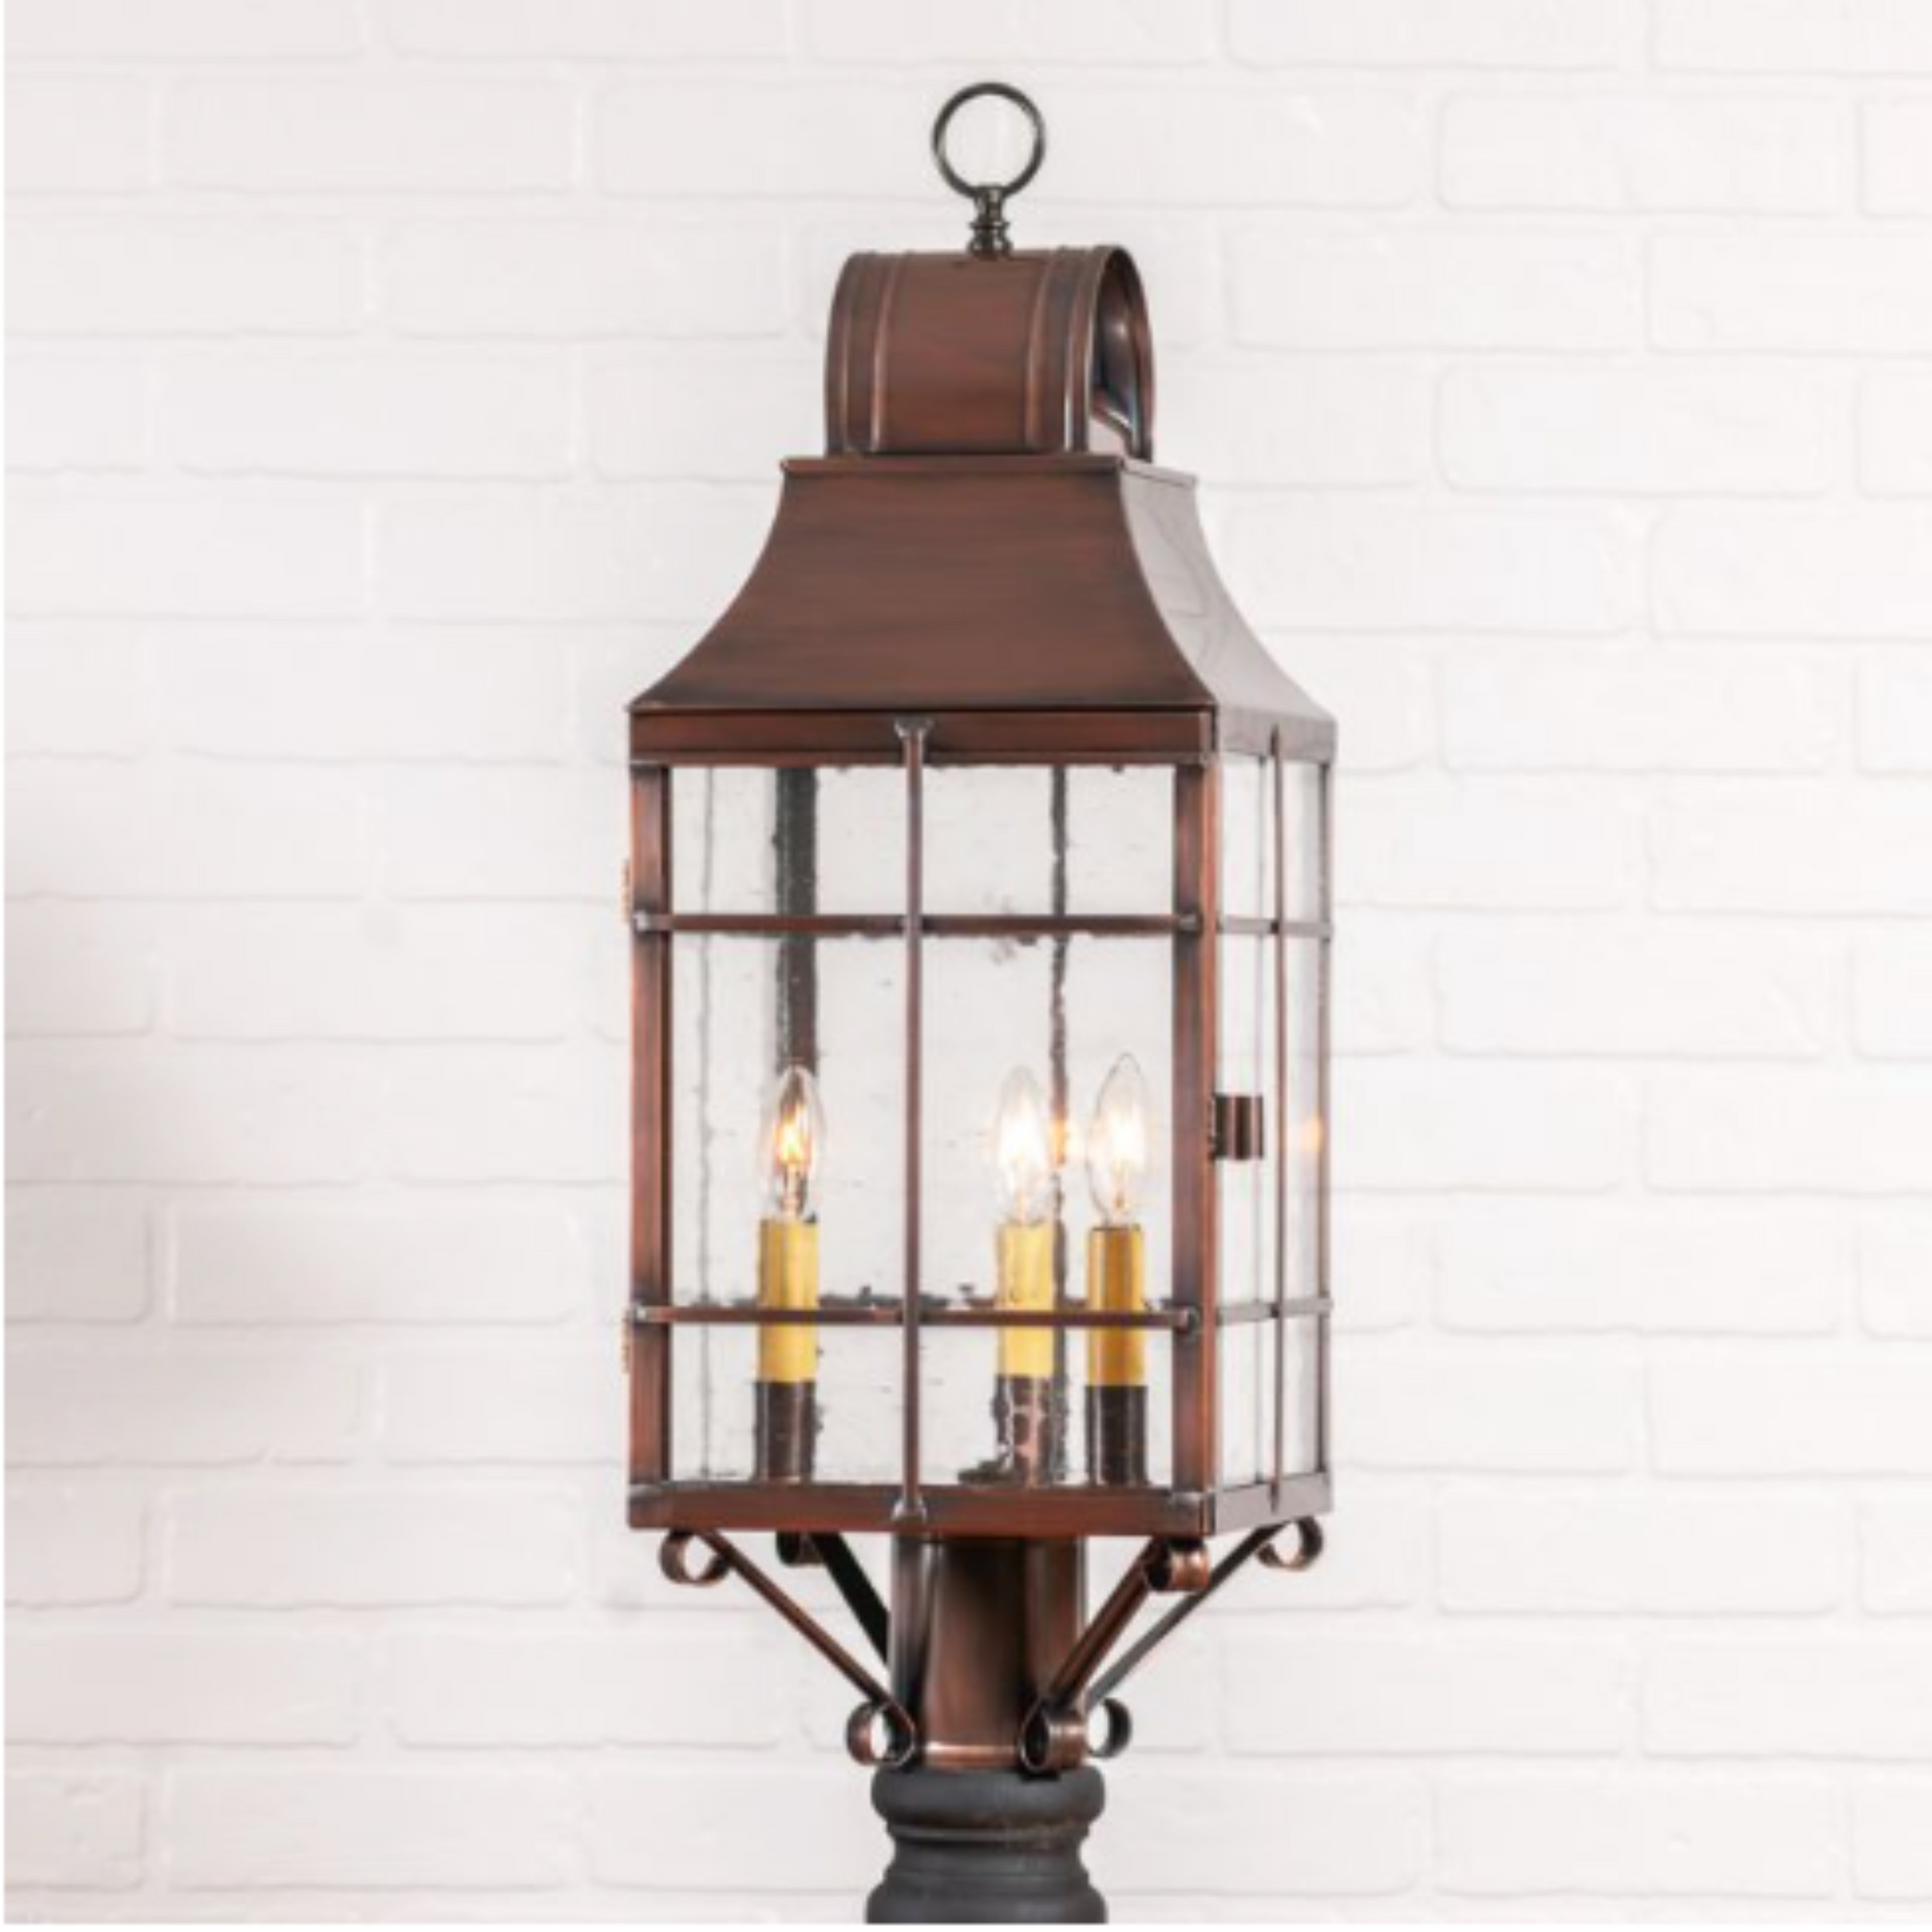 Vintage | French Colonial | Post Lantern